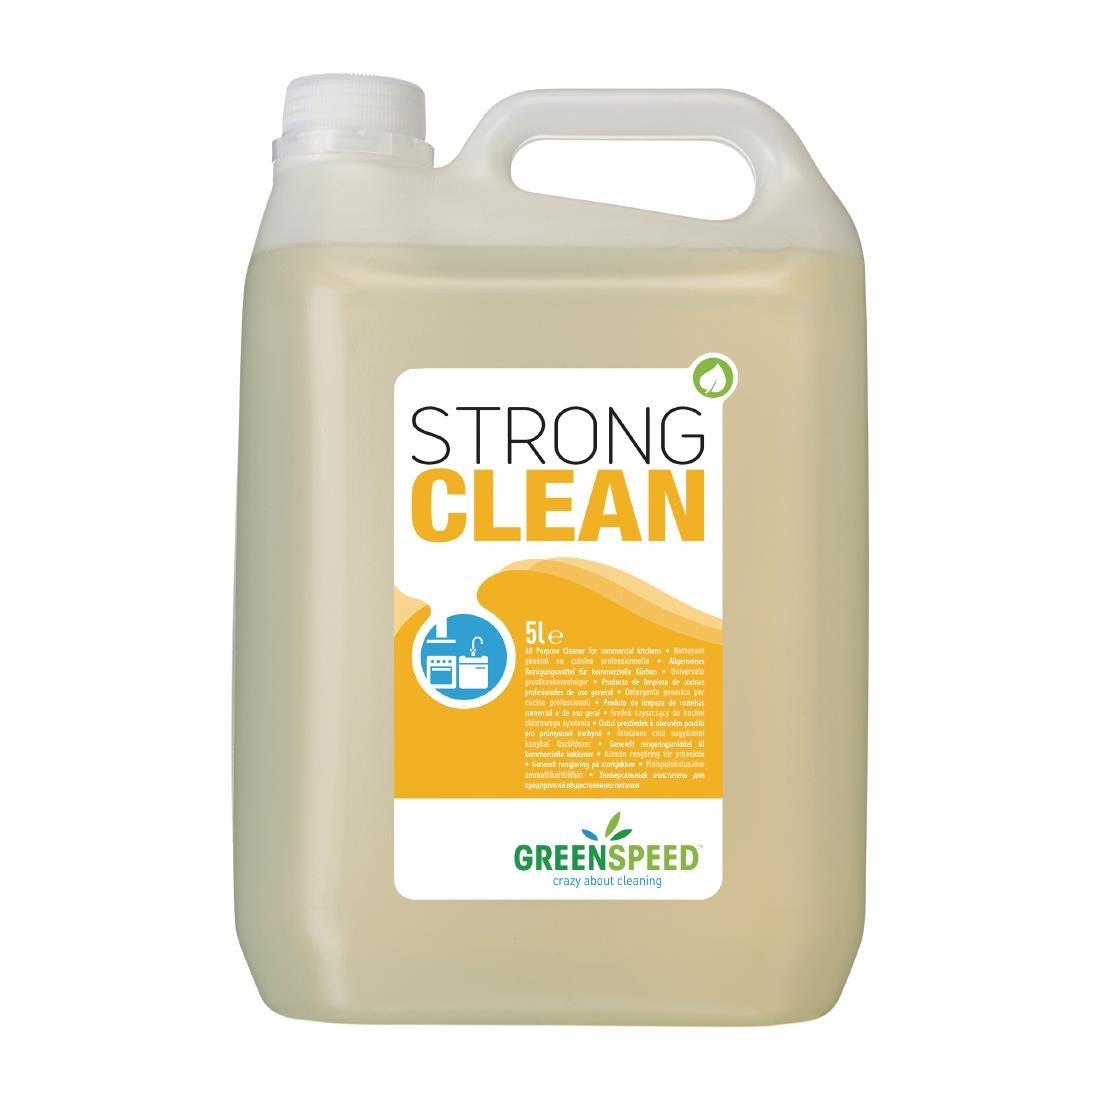 Greenspeed Kitchen Cleaner and Degreaser Concentrate 5Ltr (4 Pack)